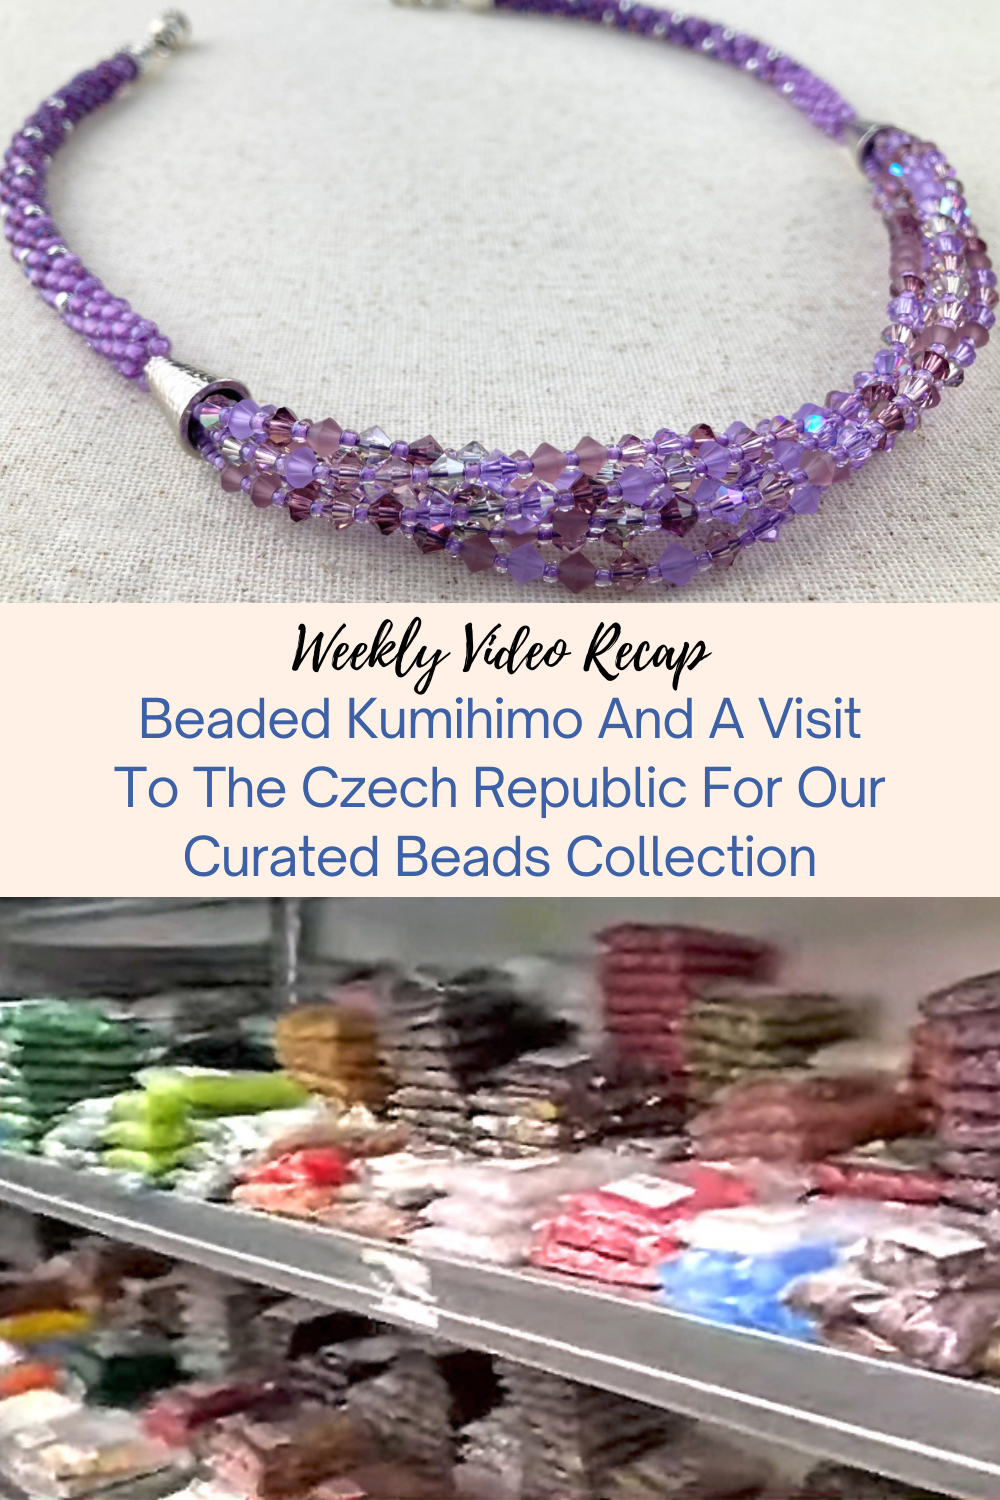 Beaded Kumihimo And A Visit To The Czech Republic For Our Curated Beads Collection Collage